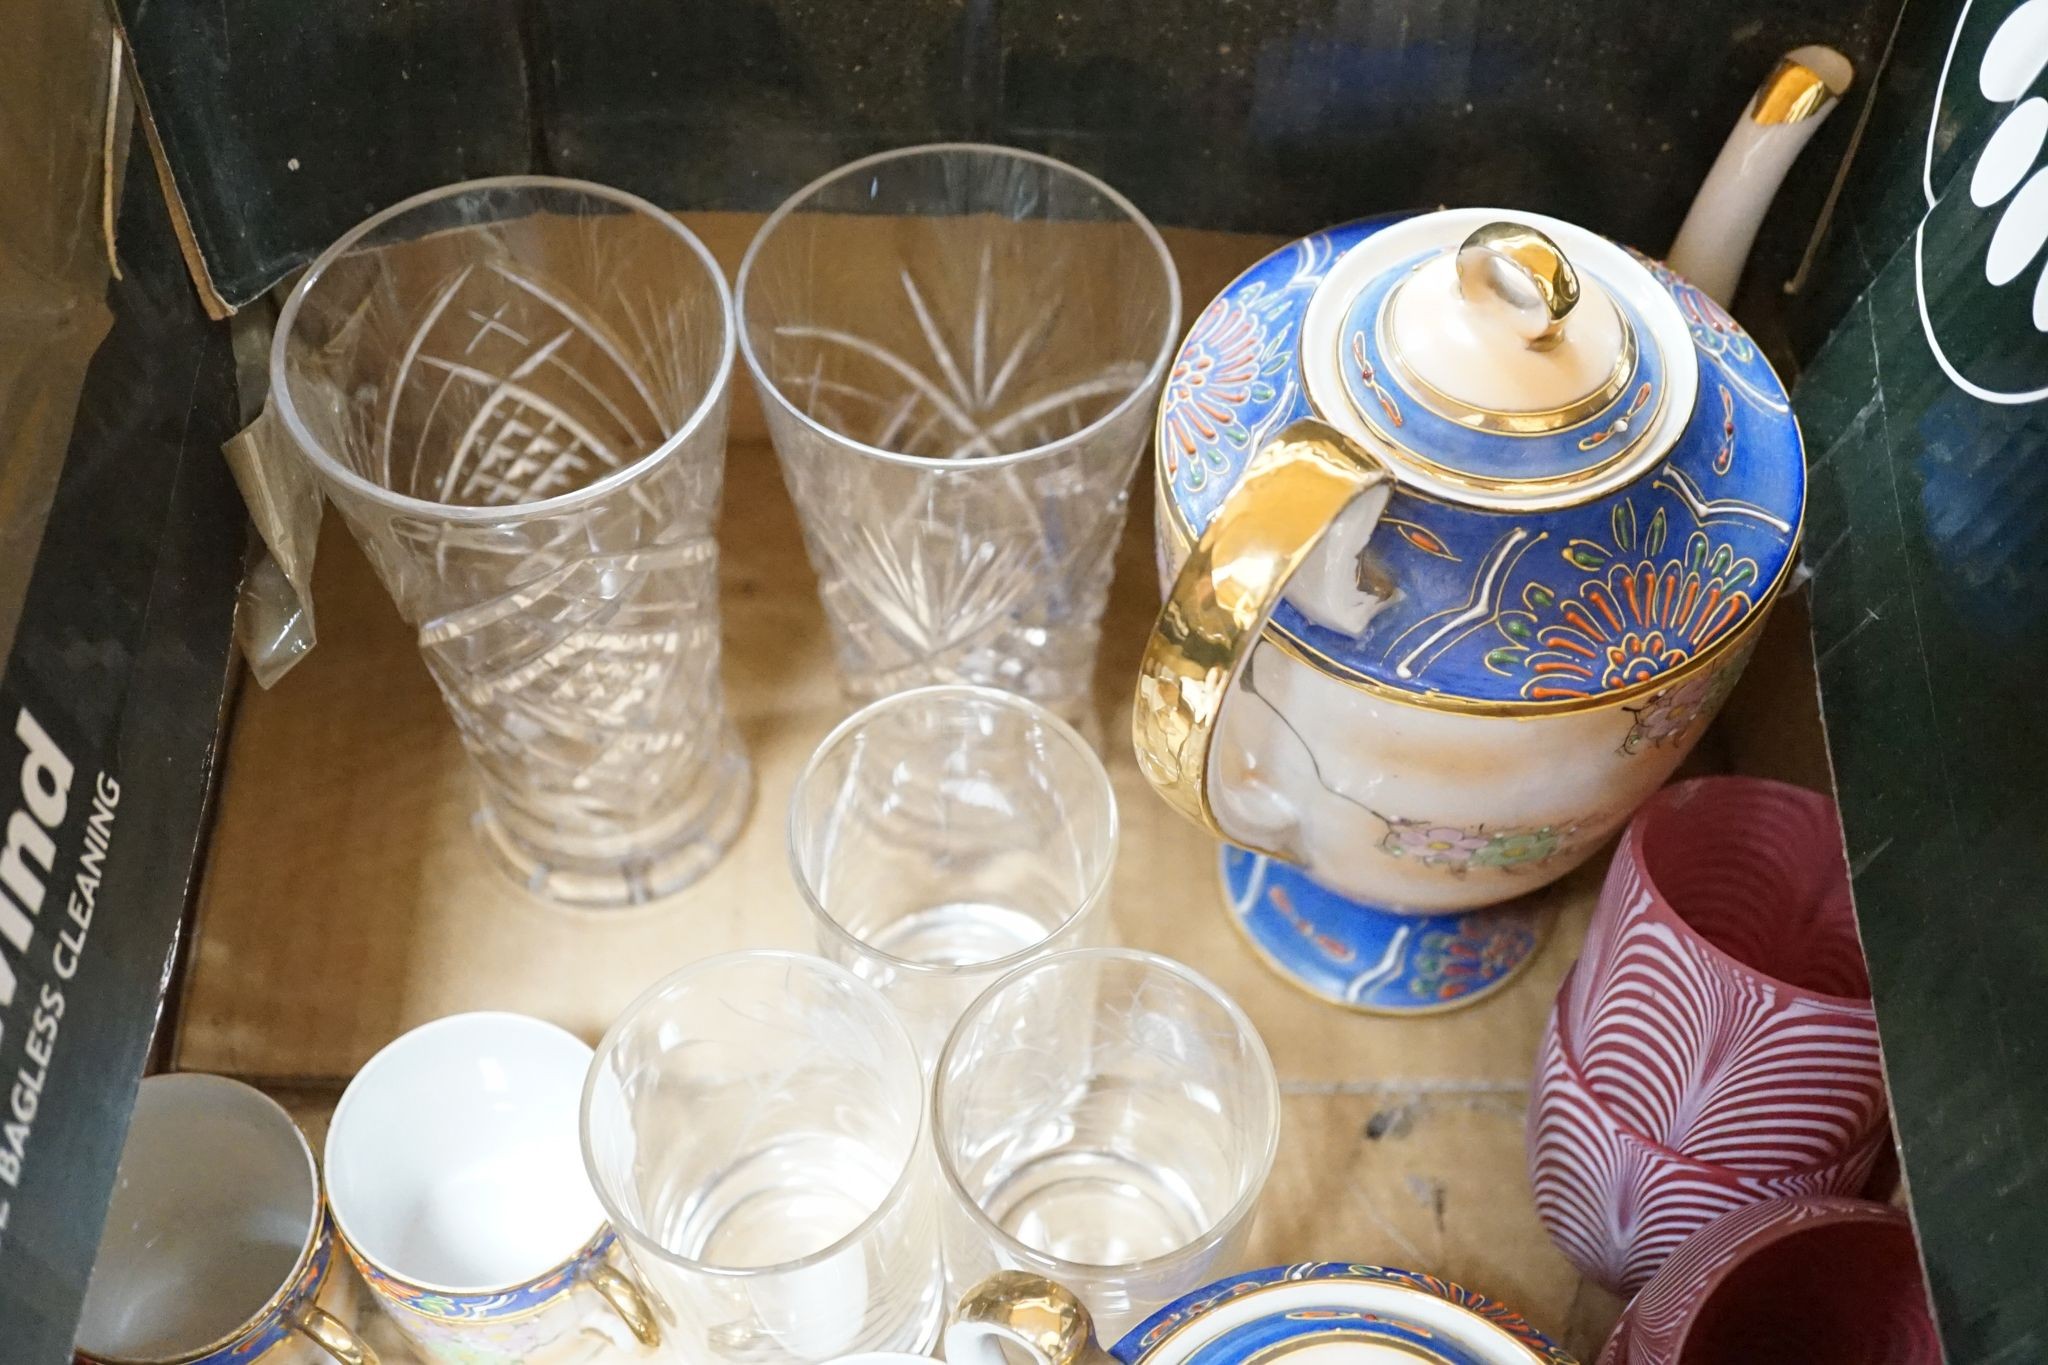 A collection of French provincial plates, various cut glass wine glasses and a Japanese Imari bowl.